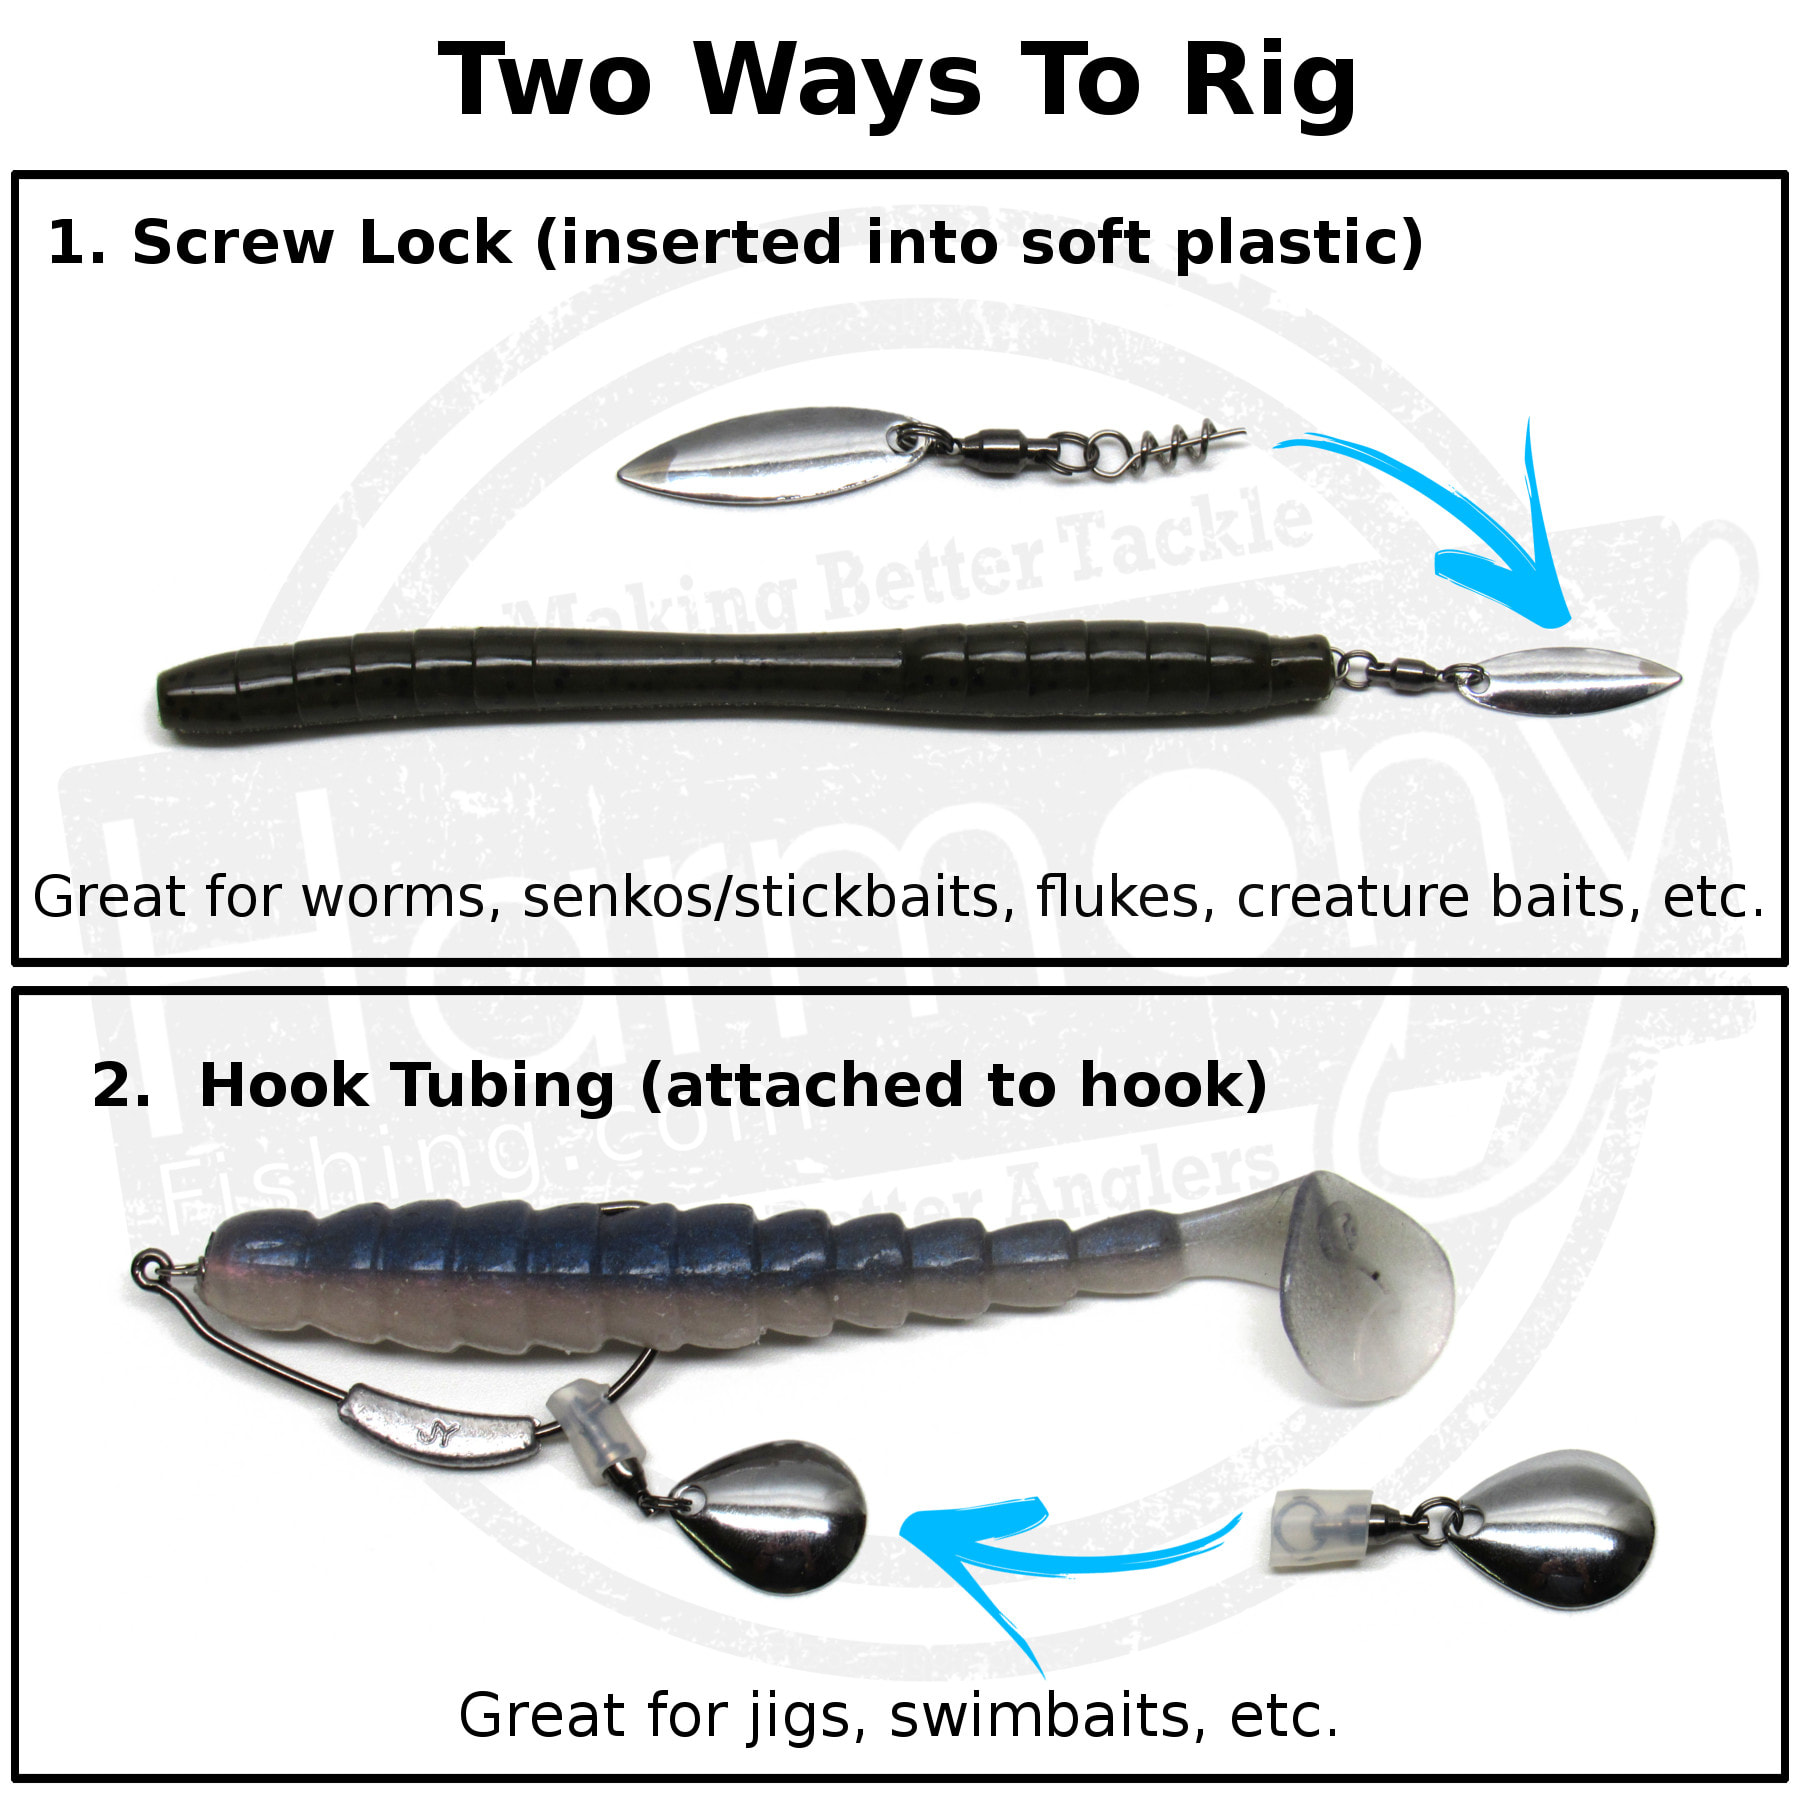 Do bass soft plastics work well for trout? (senkos, ribbon tails) if so,  how should i use them in a lake? : r/FishingForBeginners